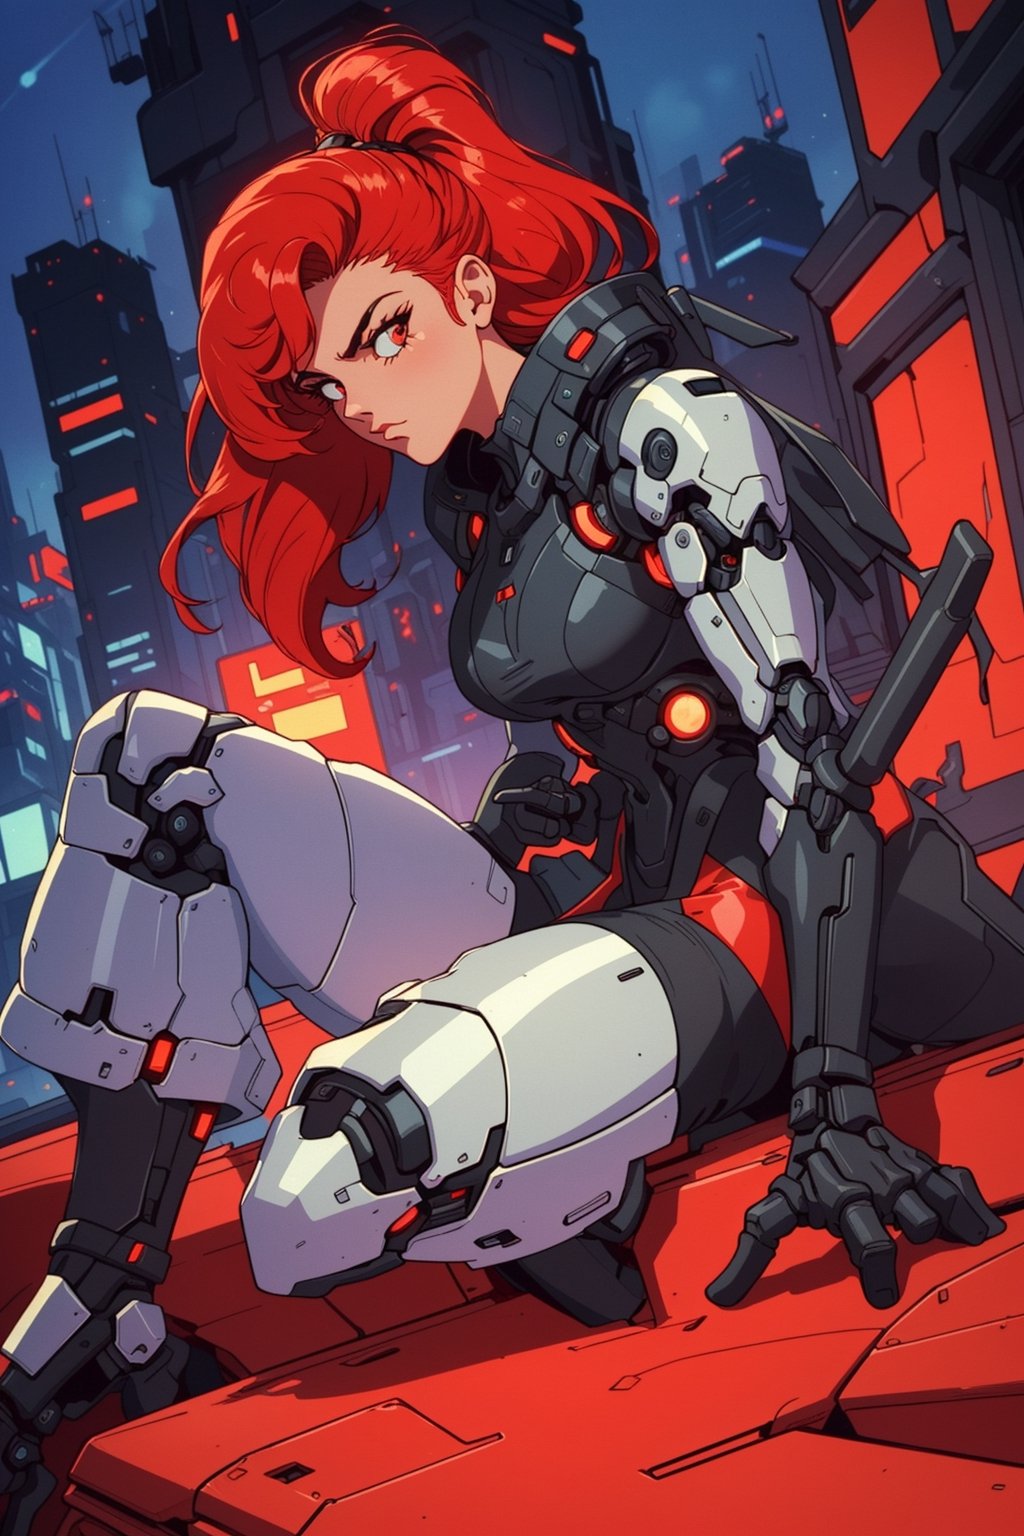 ((90s style)) Create an image of a 1girl  sleek ((RED hair)), advanced mechanical joints, designed as a futuristic defender. Show him in a dynamic pose, ready to protect a high-tech cityscape against imminent threats, utilizing his enhanced abilities,90s style,retro,,1990s (style),90s